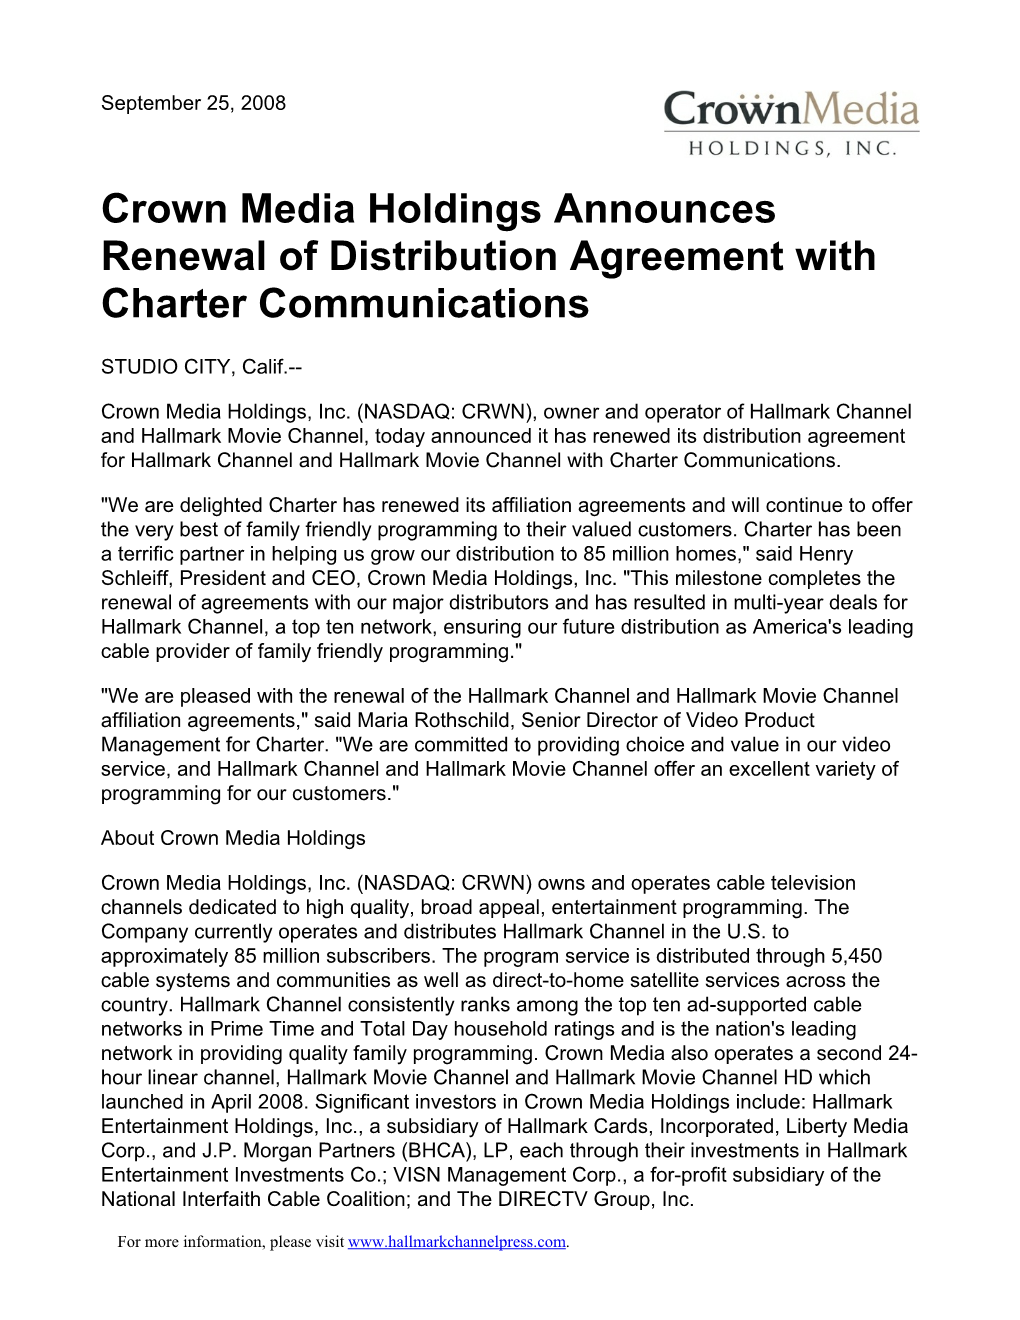 Crown Media Holdings Announces Renewal of Distribution Agreement with Charter Communications